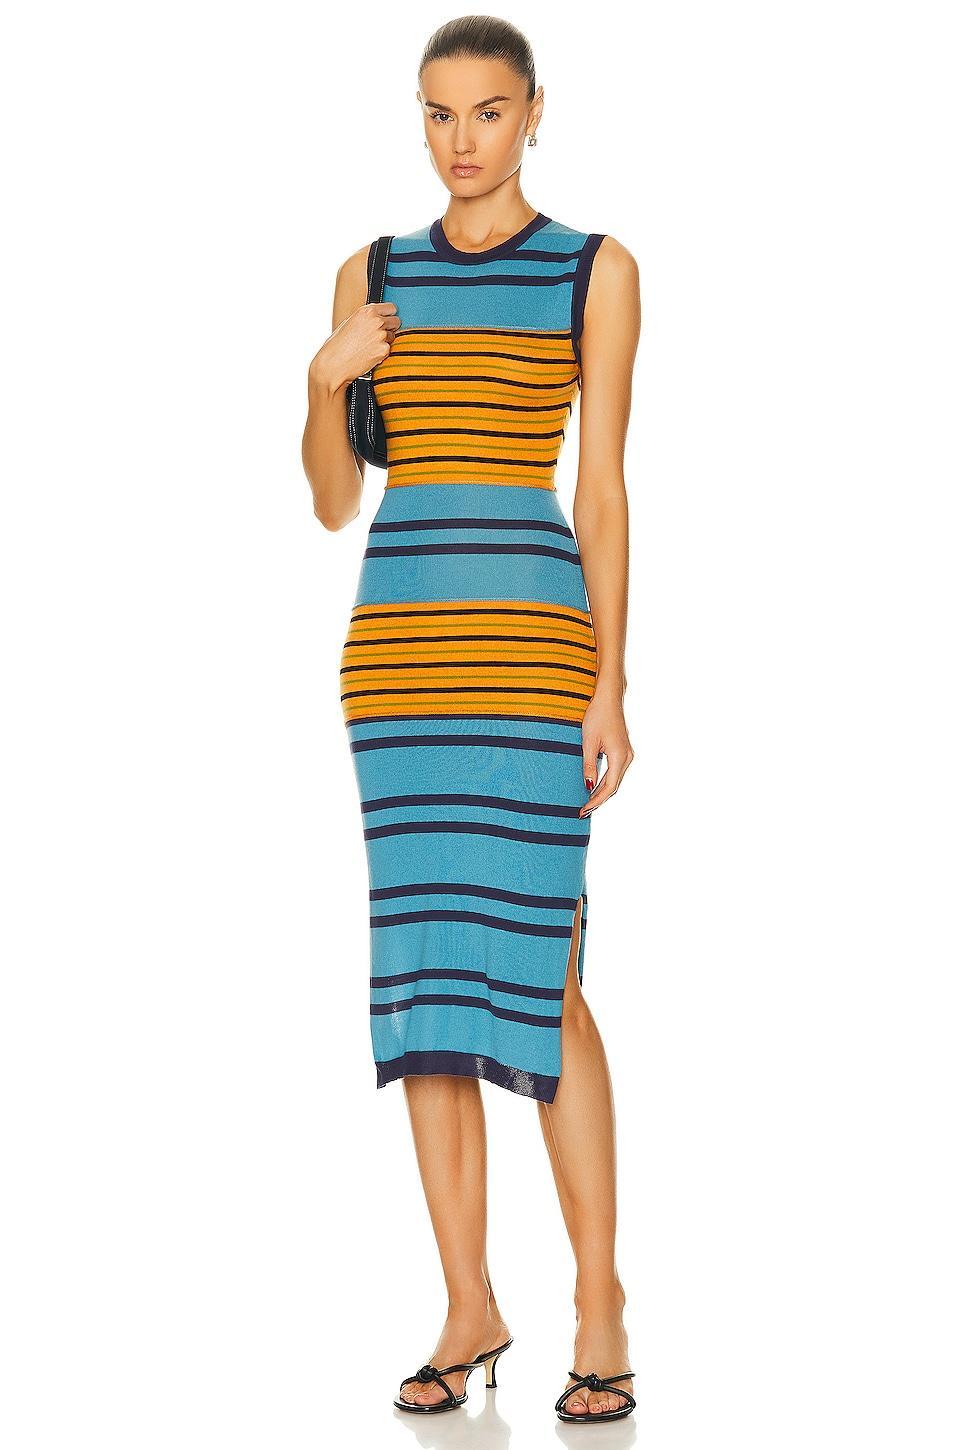 Marni Striped Dress in Blue Product Image